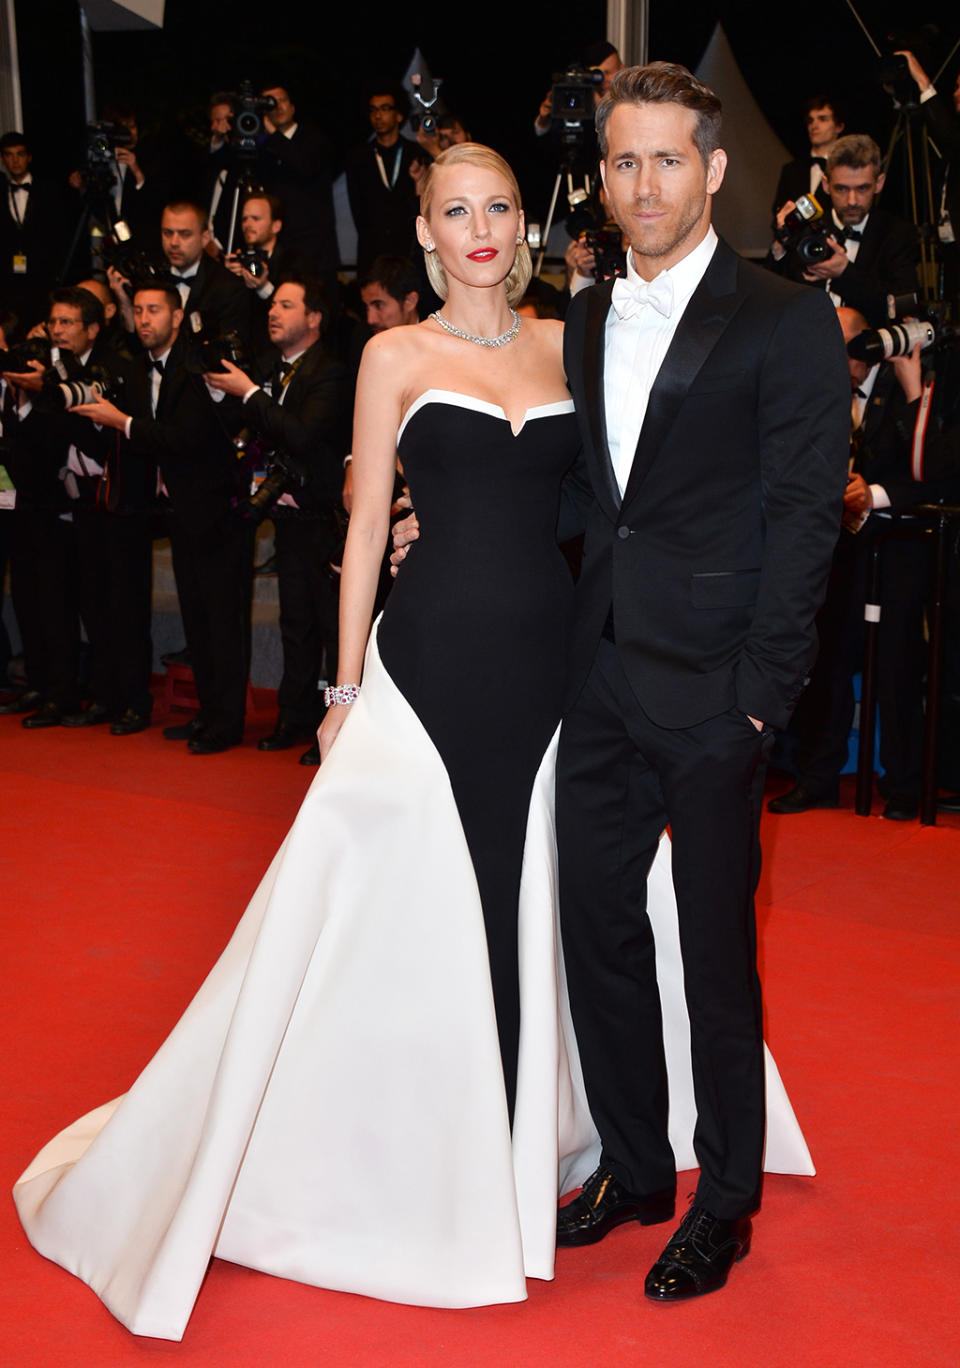 <p>A-list couple Reynolds and Lively looked stunning at the Cannes premiere of <em>The Captive</em> on May 16, 2014. (Photo: George Pimentel/WireImage) </p>